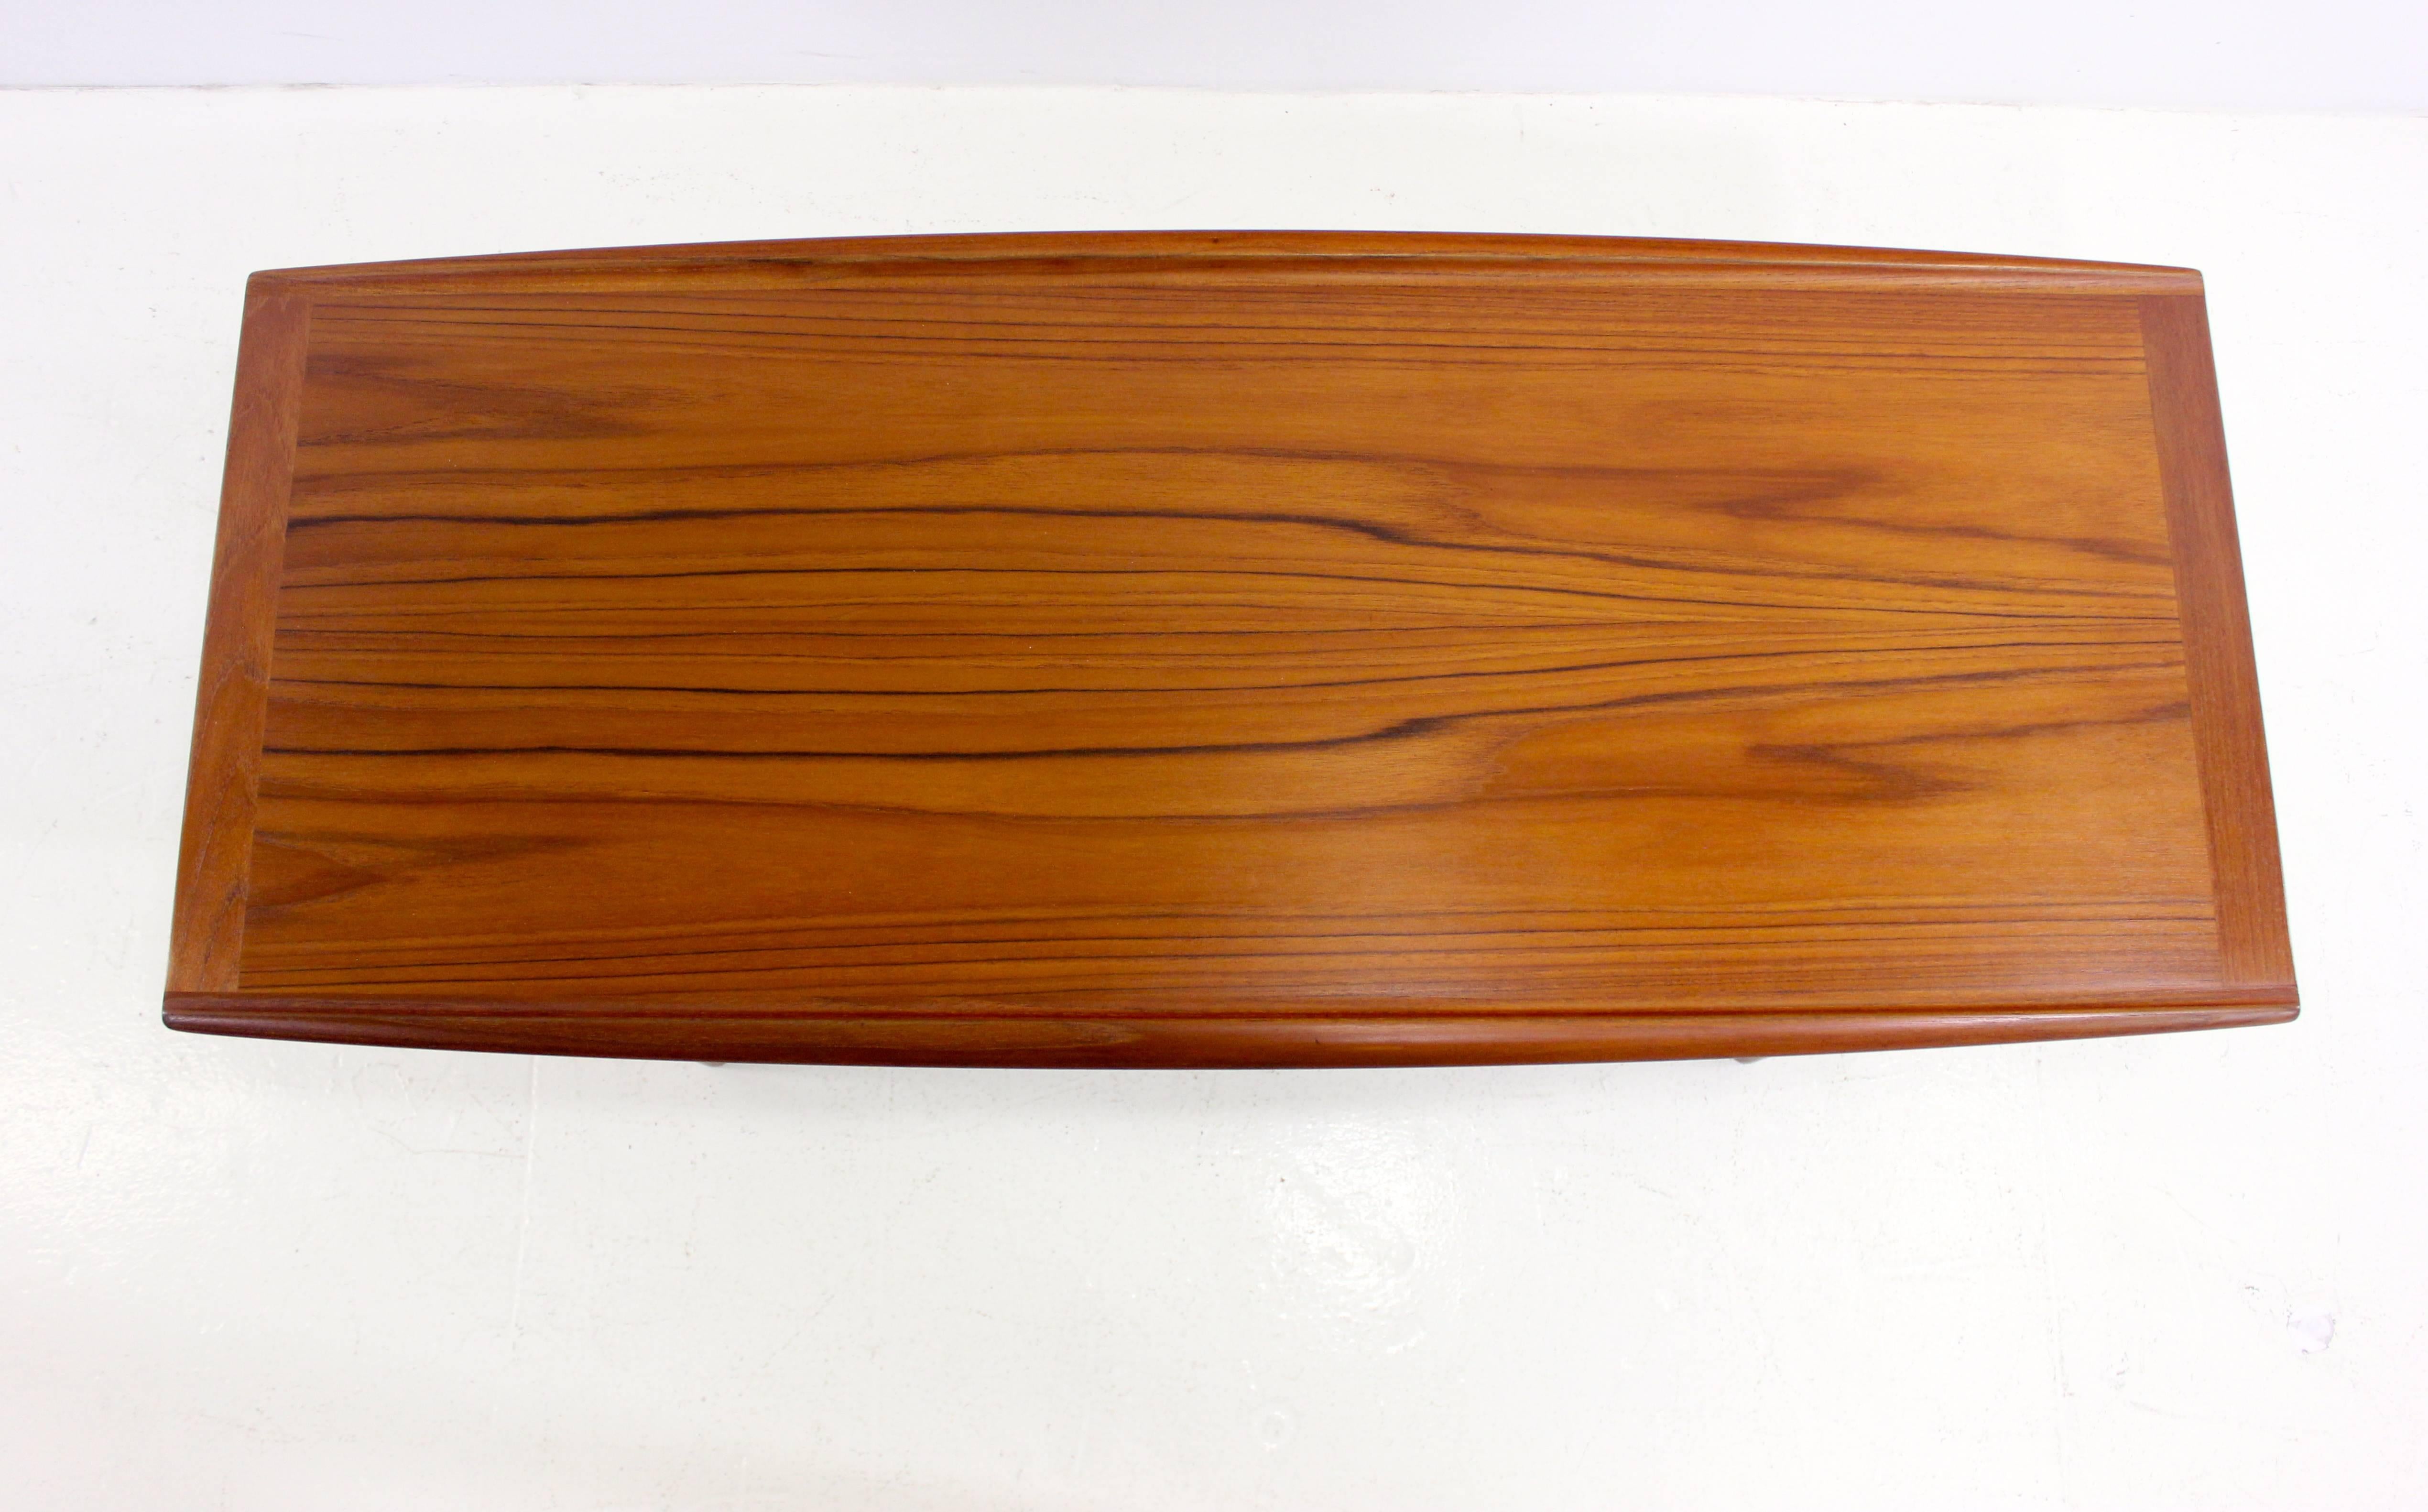 Danish Modern Teak Coffee Table Designed by Grete Jalk In Excellent Condition For Sale In Portland, OR